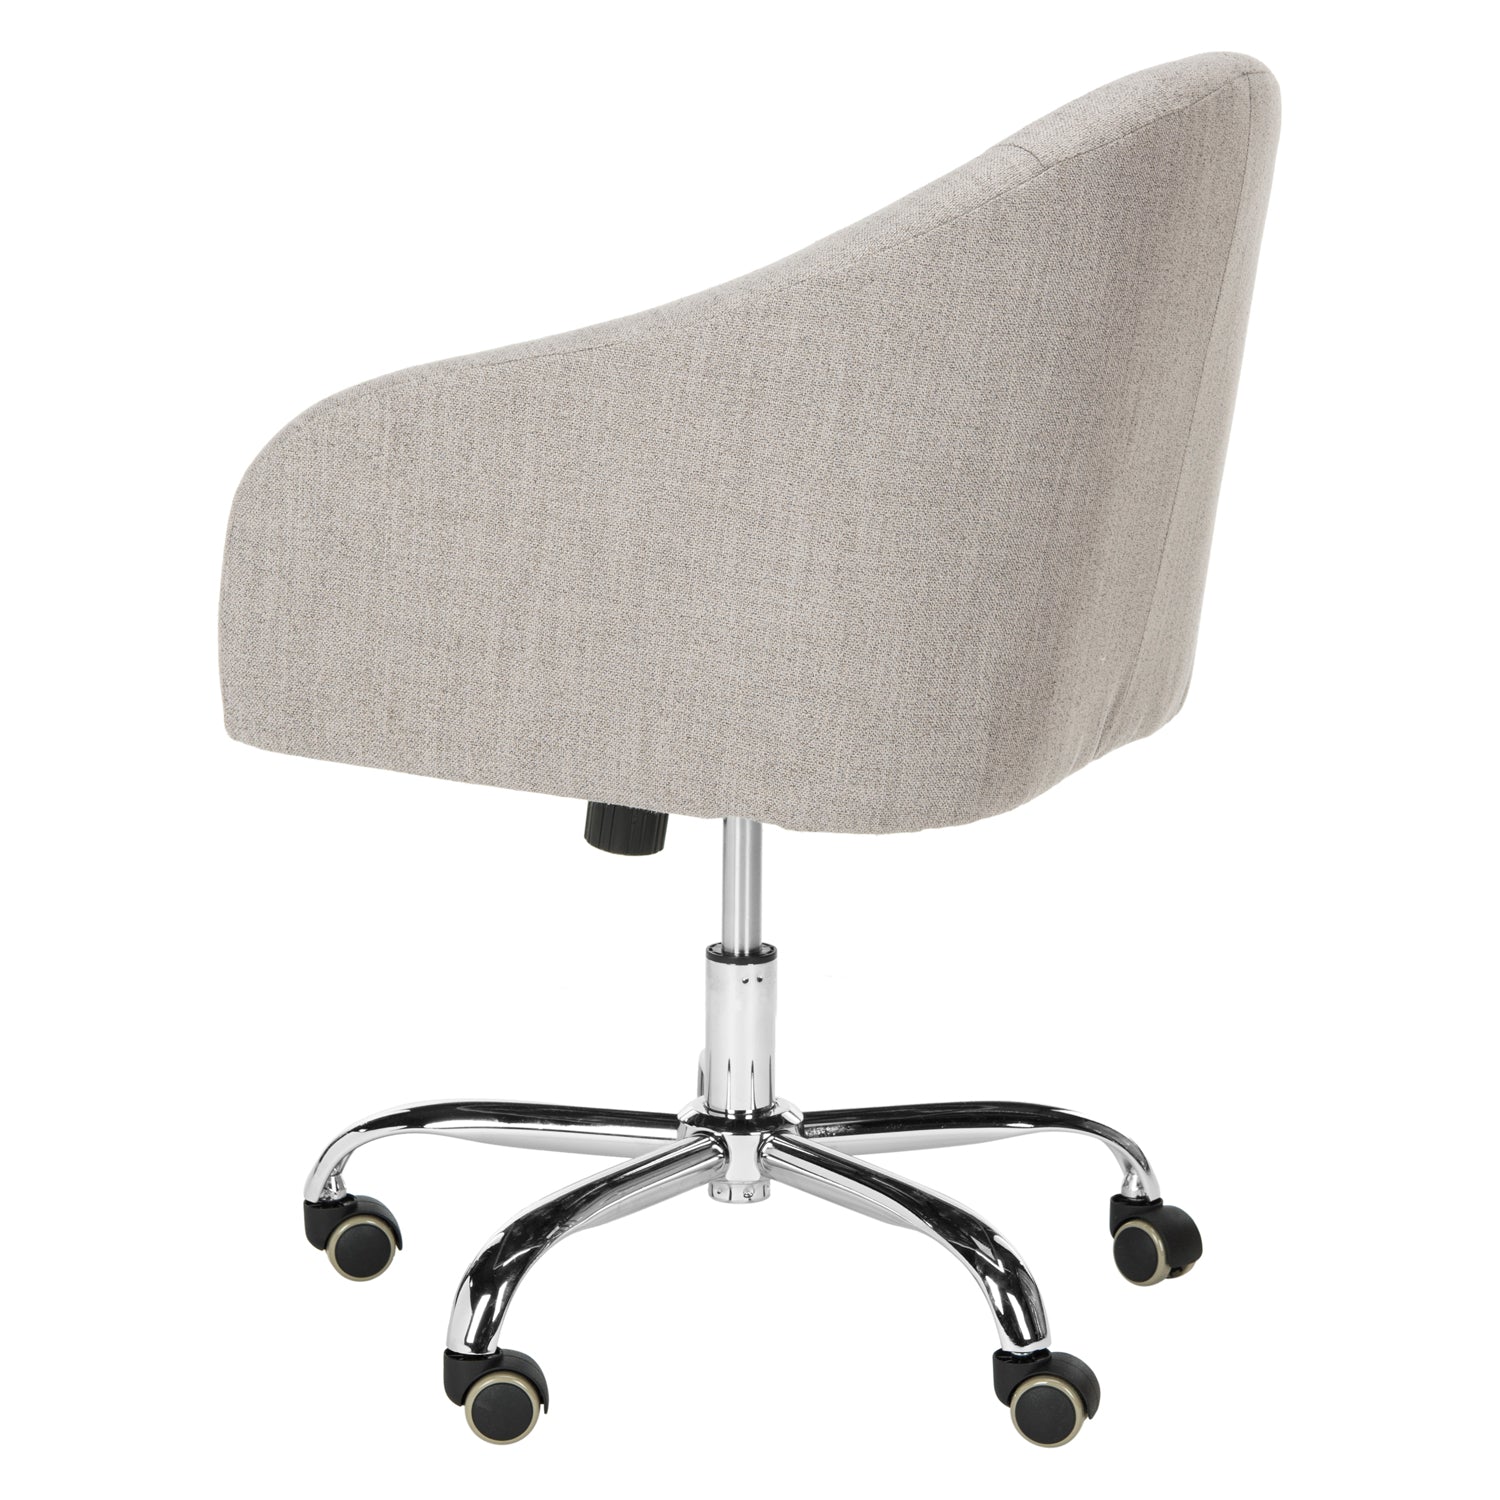 Summerlin Office Chair – Paynes Gray